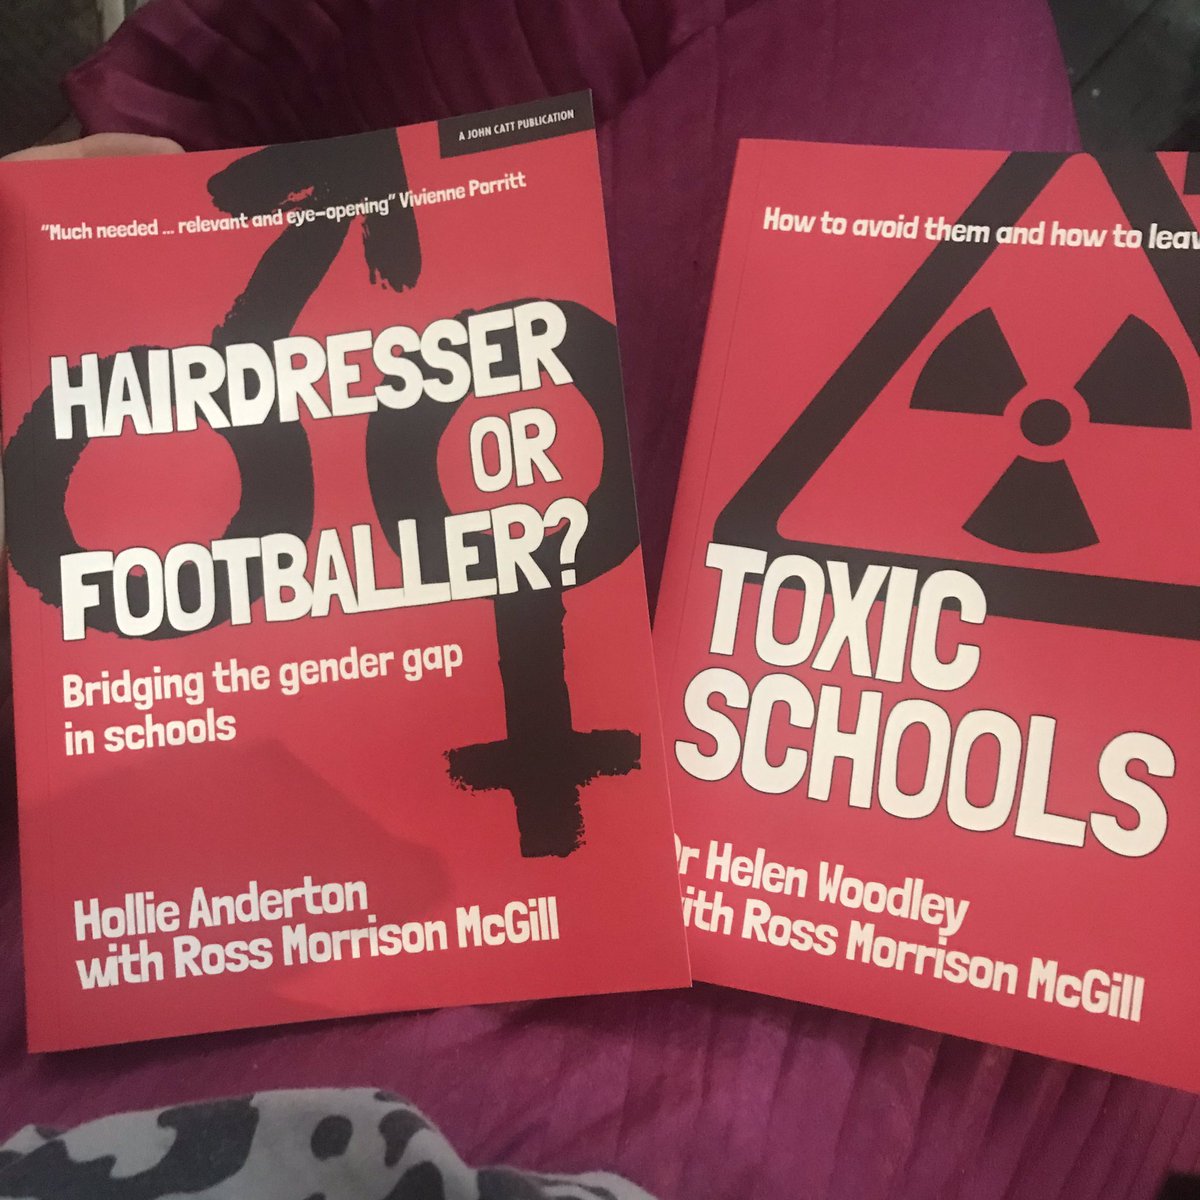 Great evening last night with @SloughEtonHead at the launch for these two books by @year6missNW and @HelenWoodley and @TeacherToolkit. Fantastic that Ross is giving new voices in education a platform to have their work published. Important topics. #ToxicSchools #GenderGap